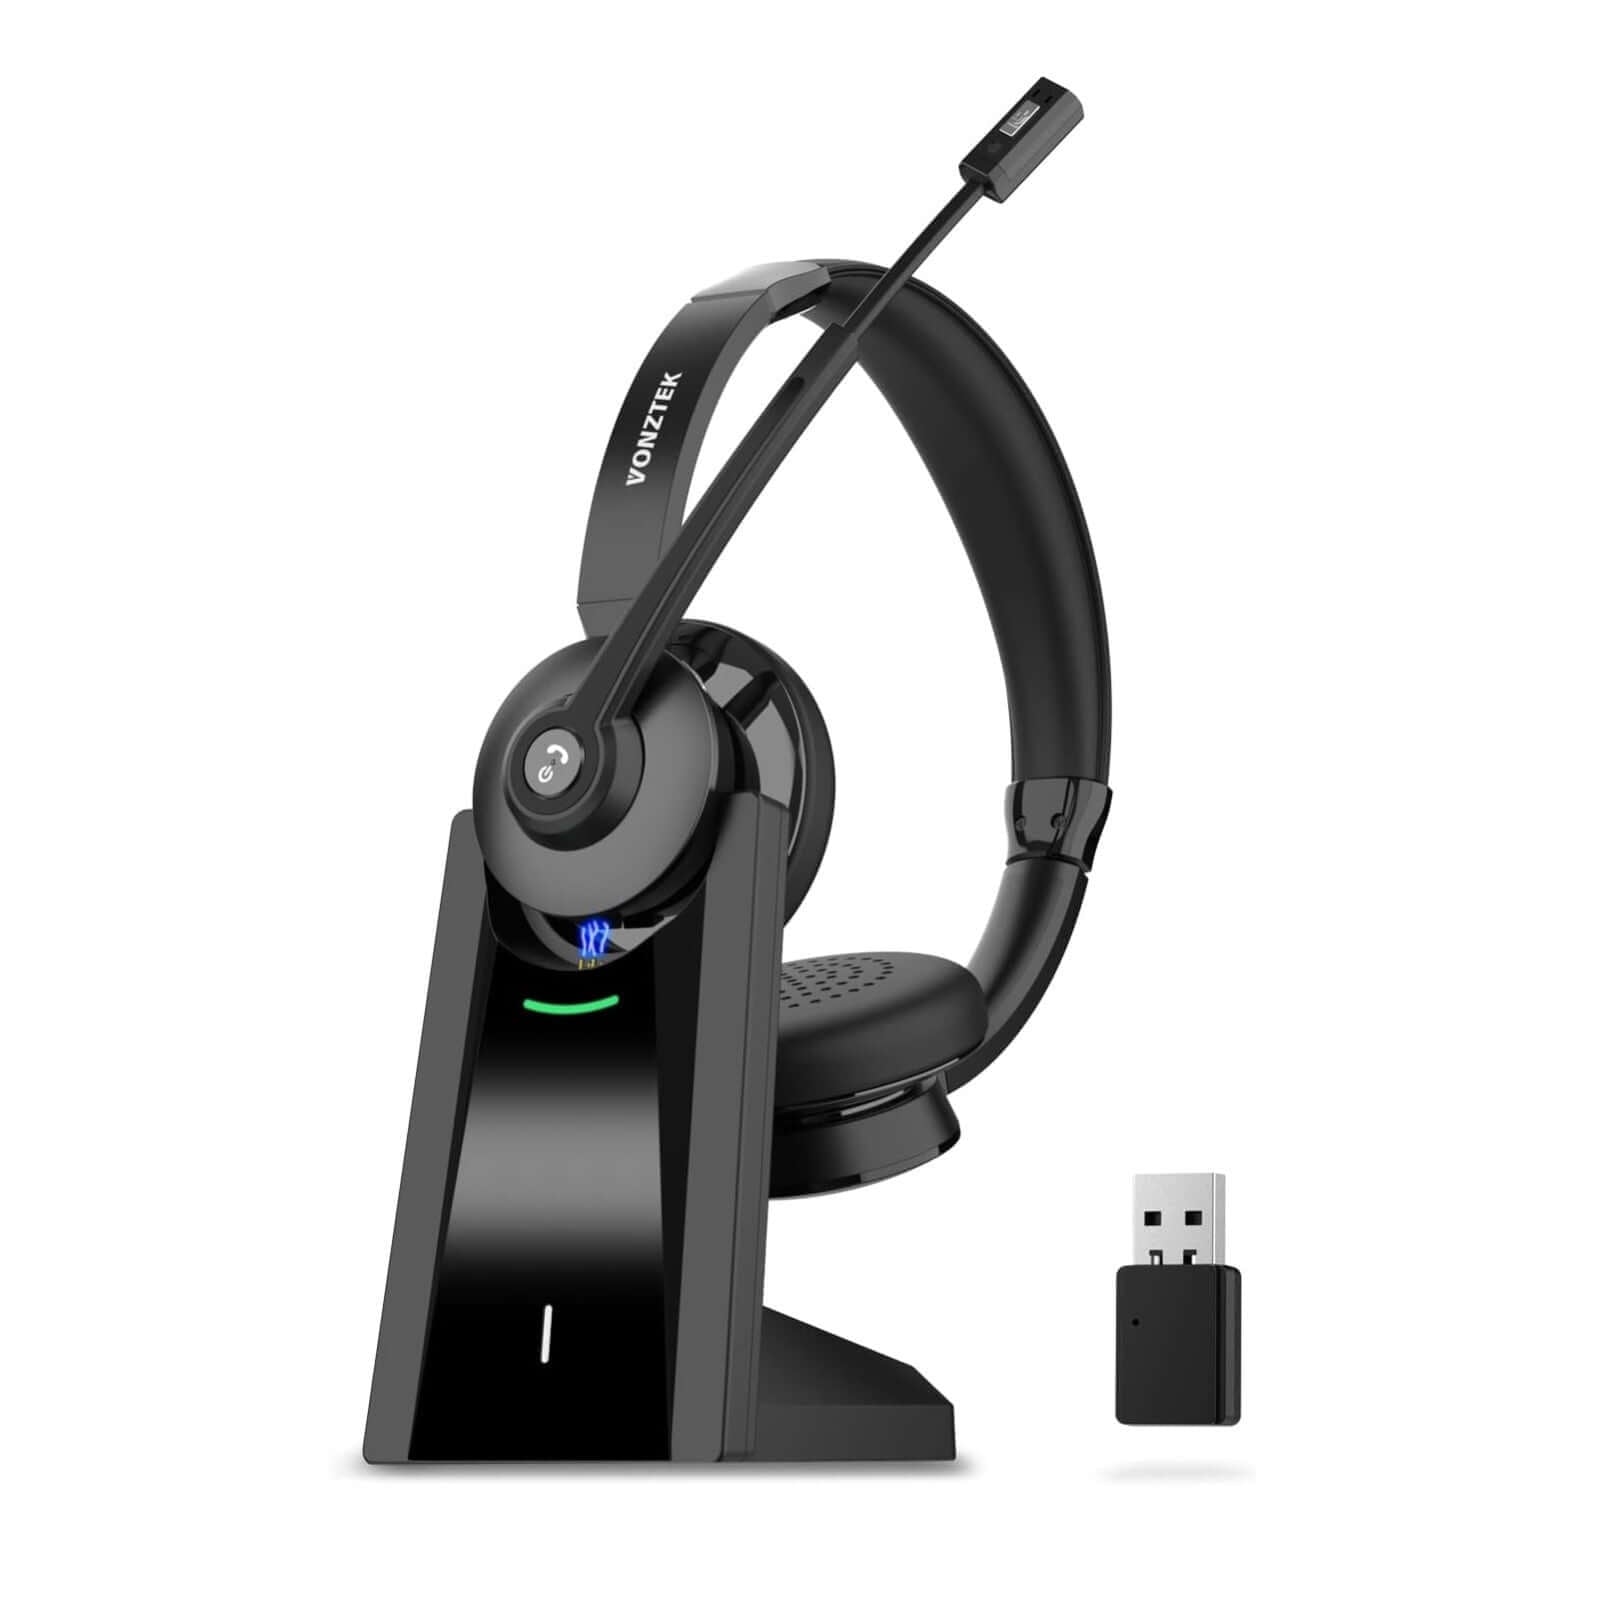  Wireless Headset,v5.3 Bluetooth Headset, Wireless Headphones with Microphone Noise Canceling, Charging Dock & Dongle, Wireless Headset with Microphone for PC,Home/Office-Black/Grey